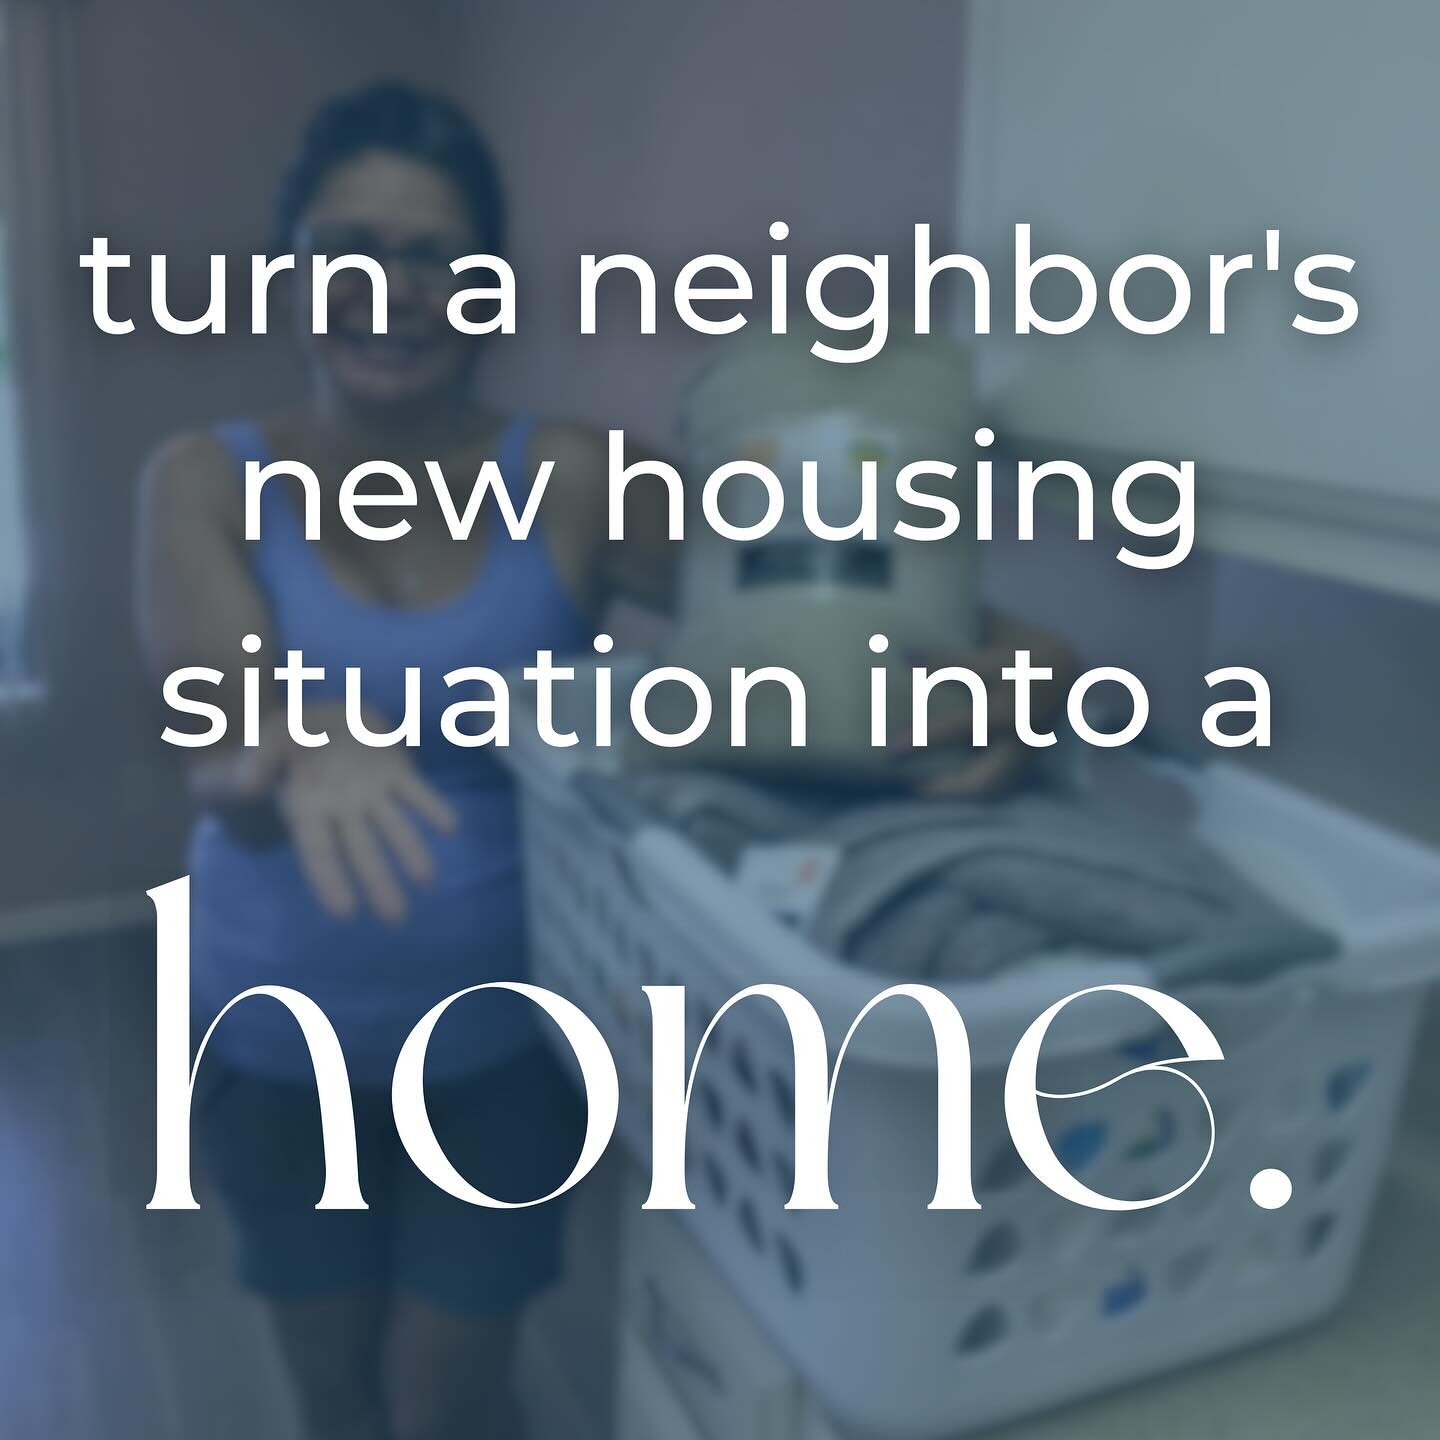 🏠 Welcome Home, Neighbor! 🏠

Meet Loretta*, whose inspiring journey home is a testament to resilience and community support.

Help us fill more homes with love by donating Welcome Home Baskets! Each basket is packed with care and filled with househ